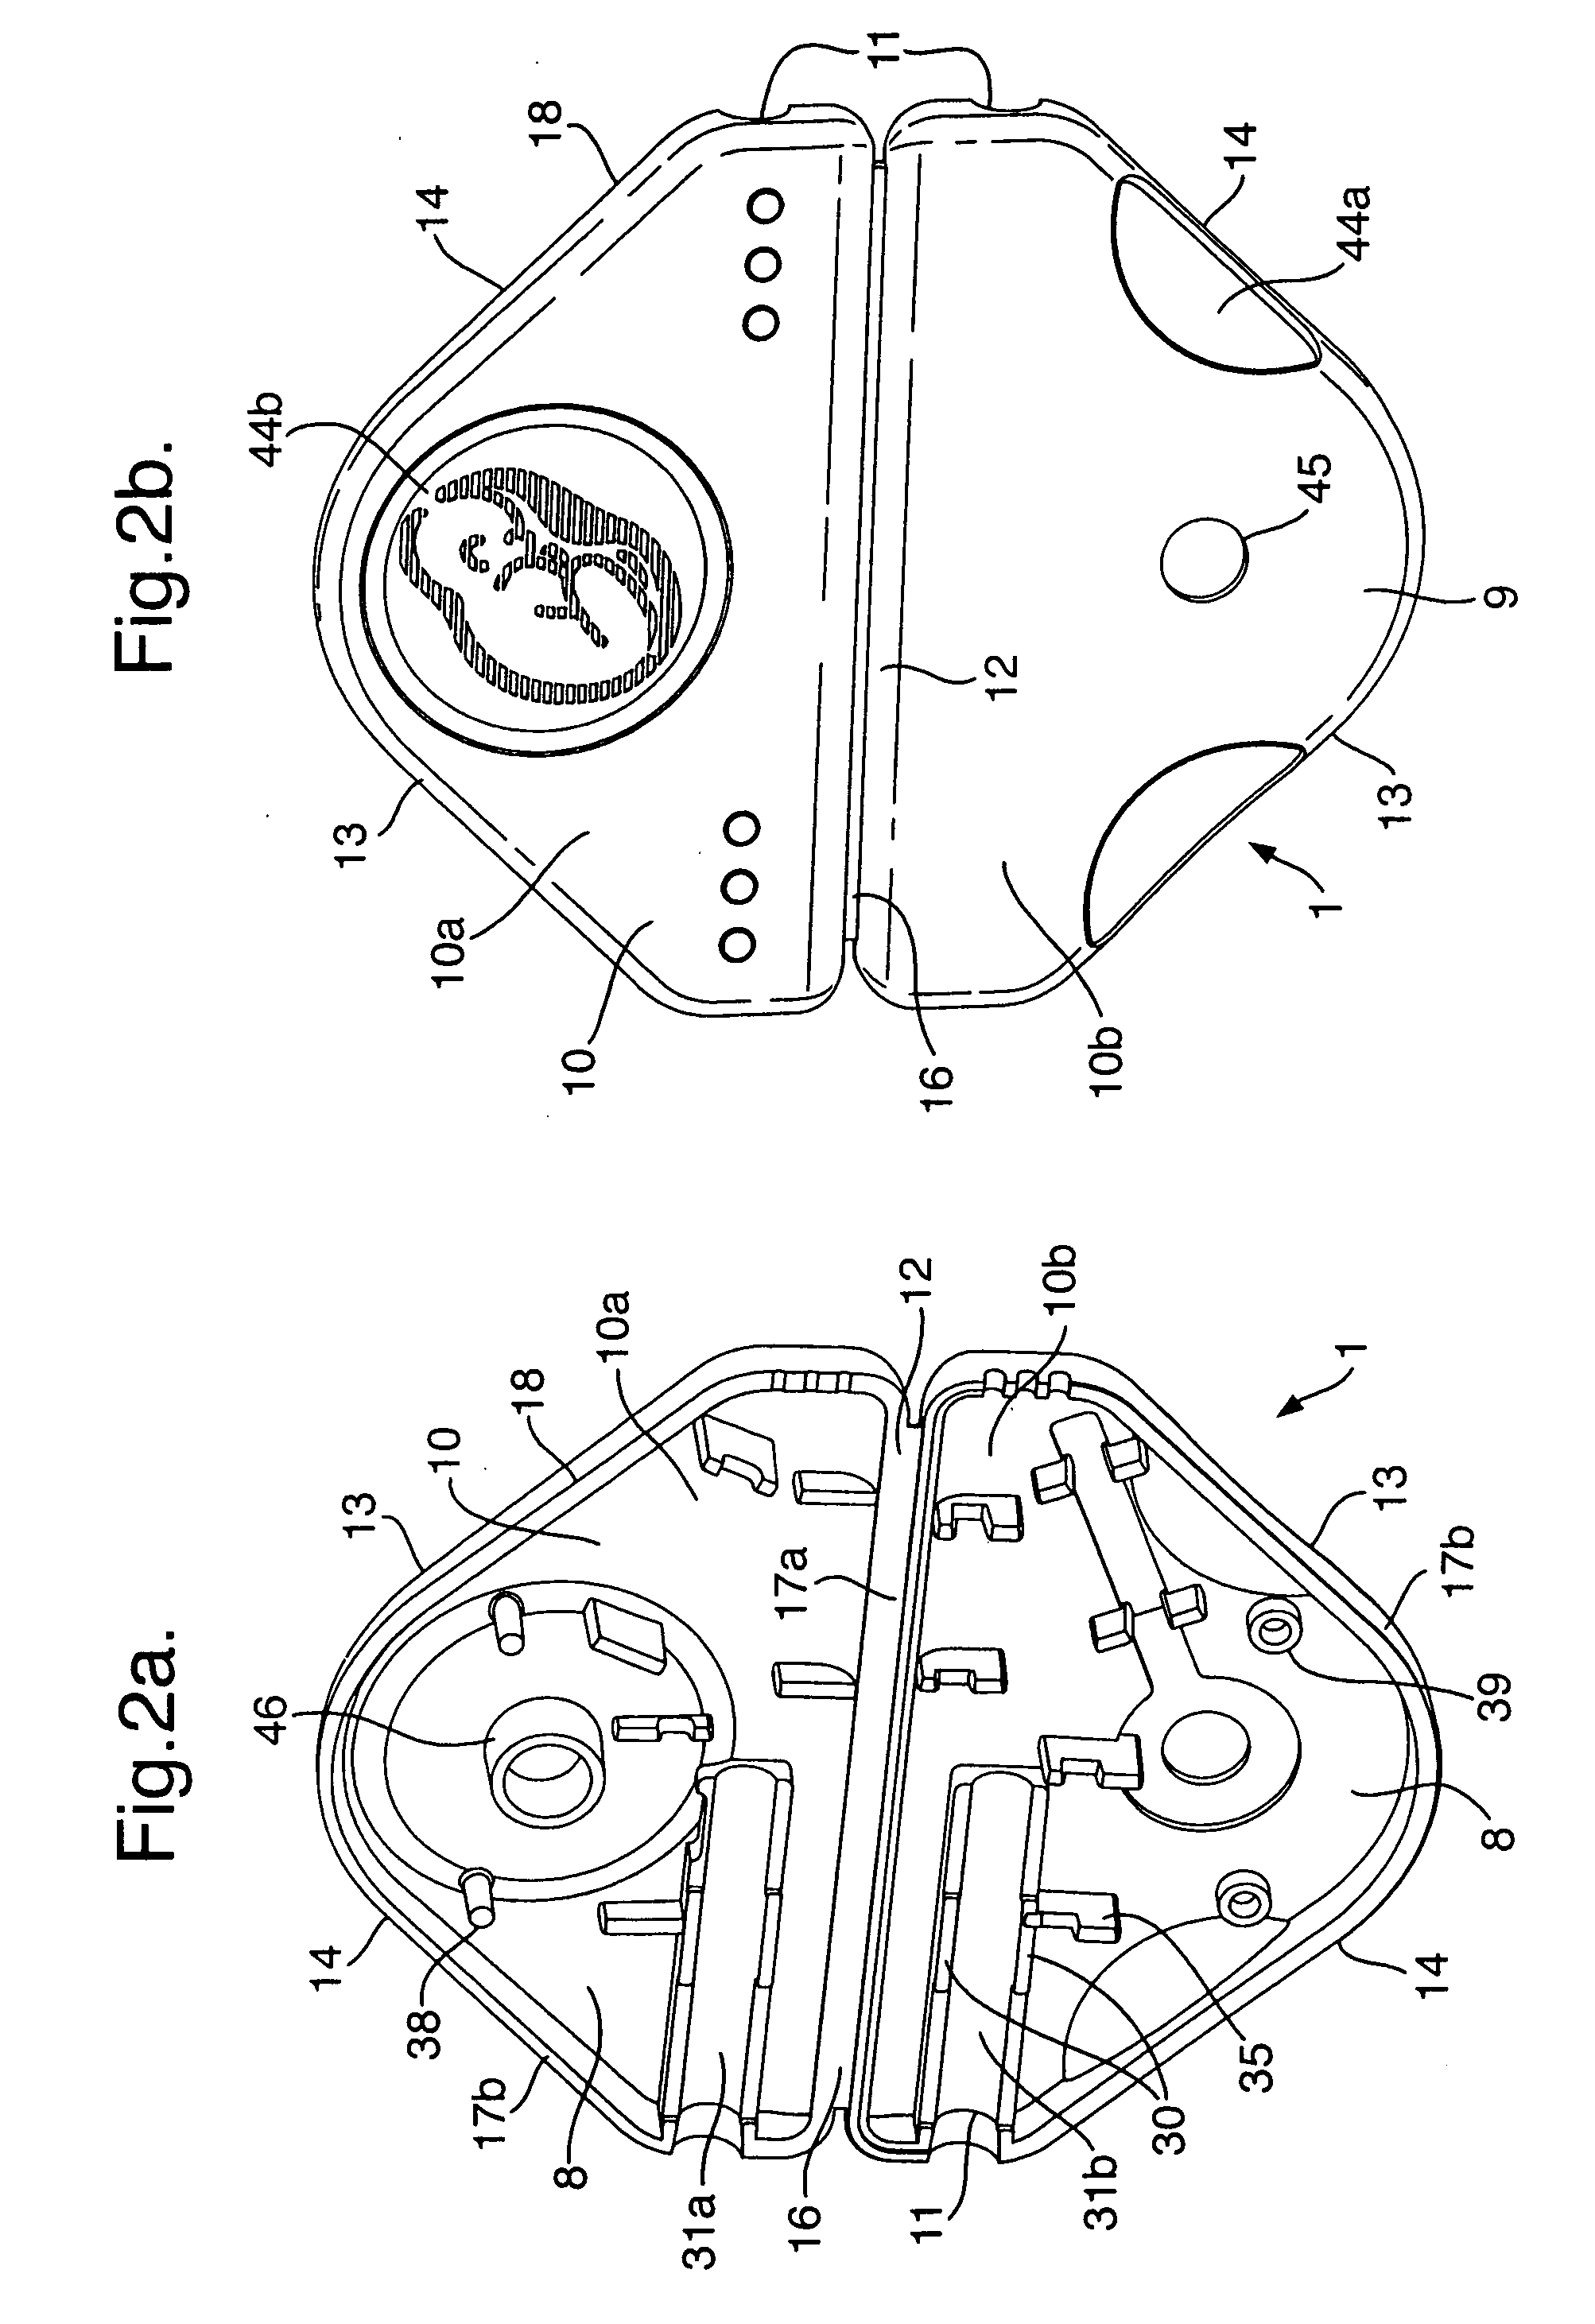 Single-use connection system for a fetal electrode